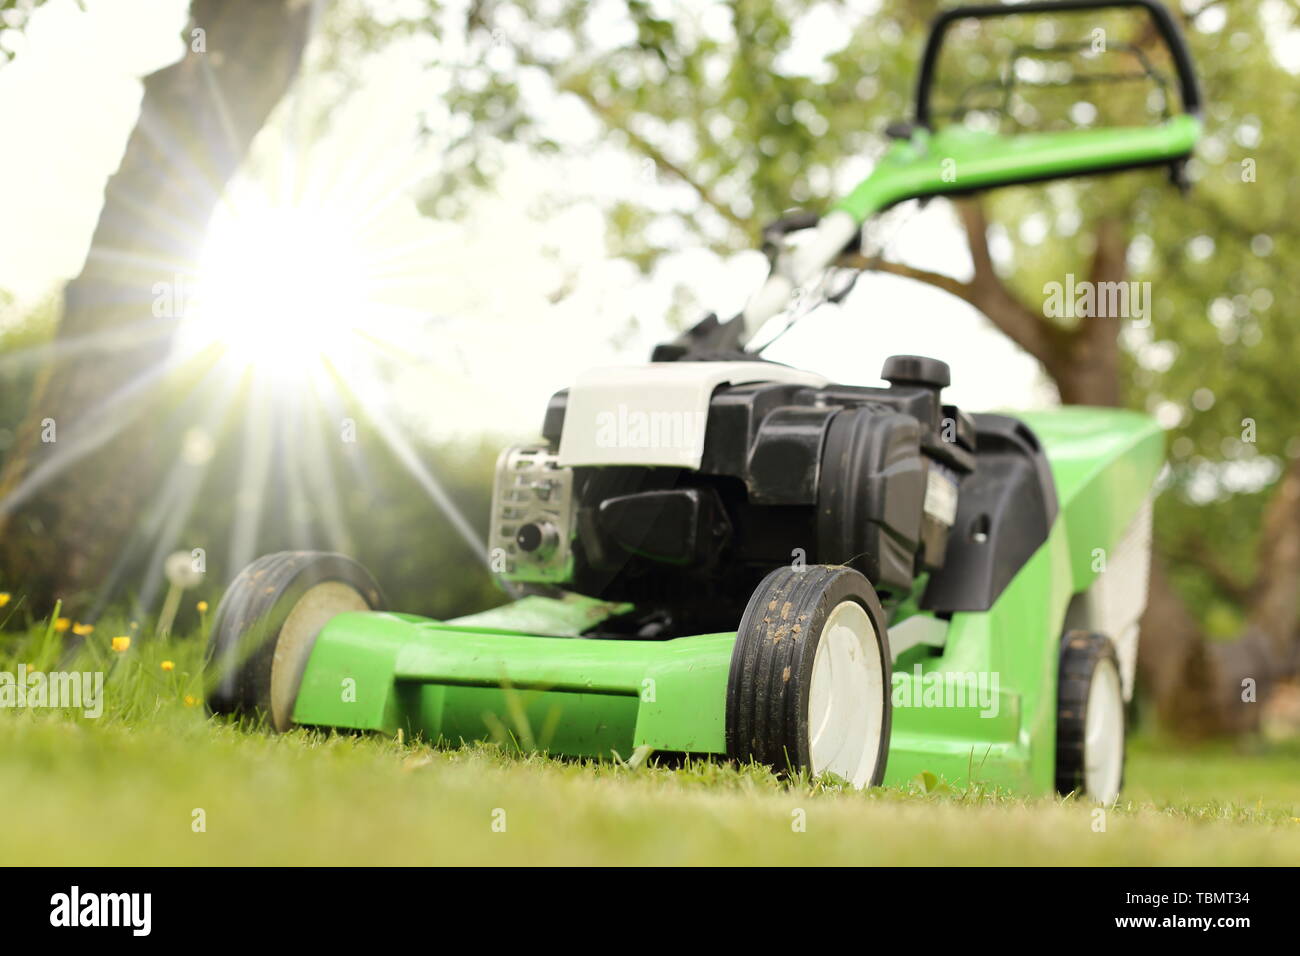 A Close-up of a  Lawnmower in a sunny garden Stock Photo